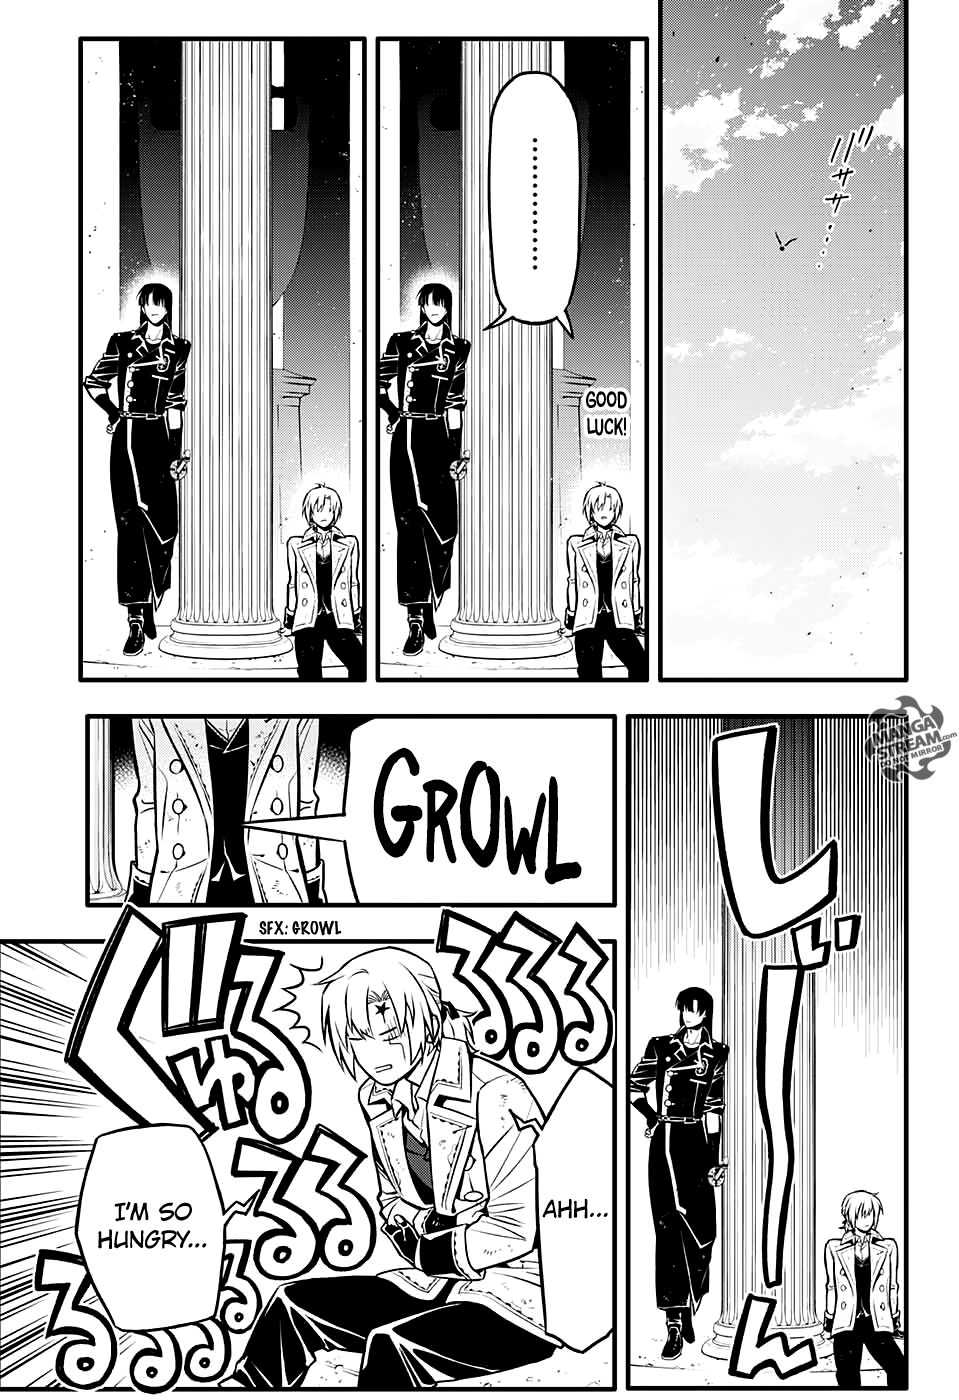 D.Gray-man chapter 231 page 11